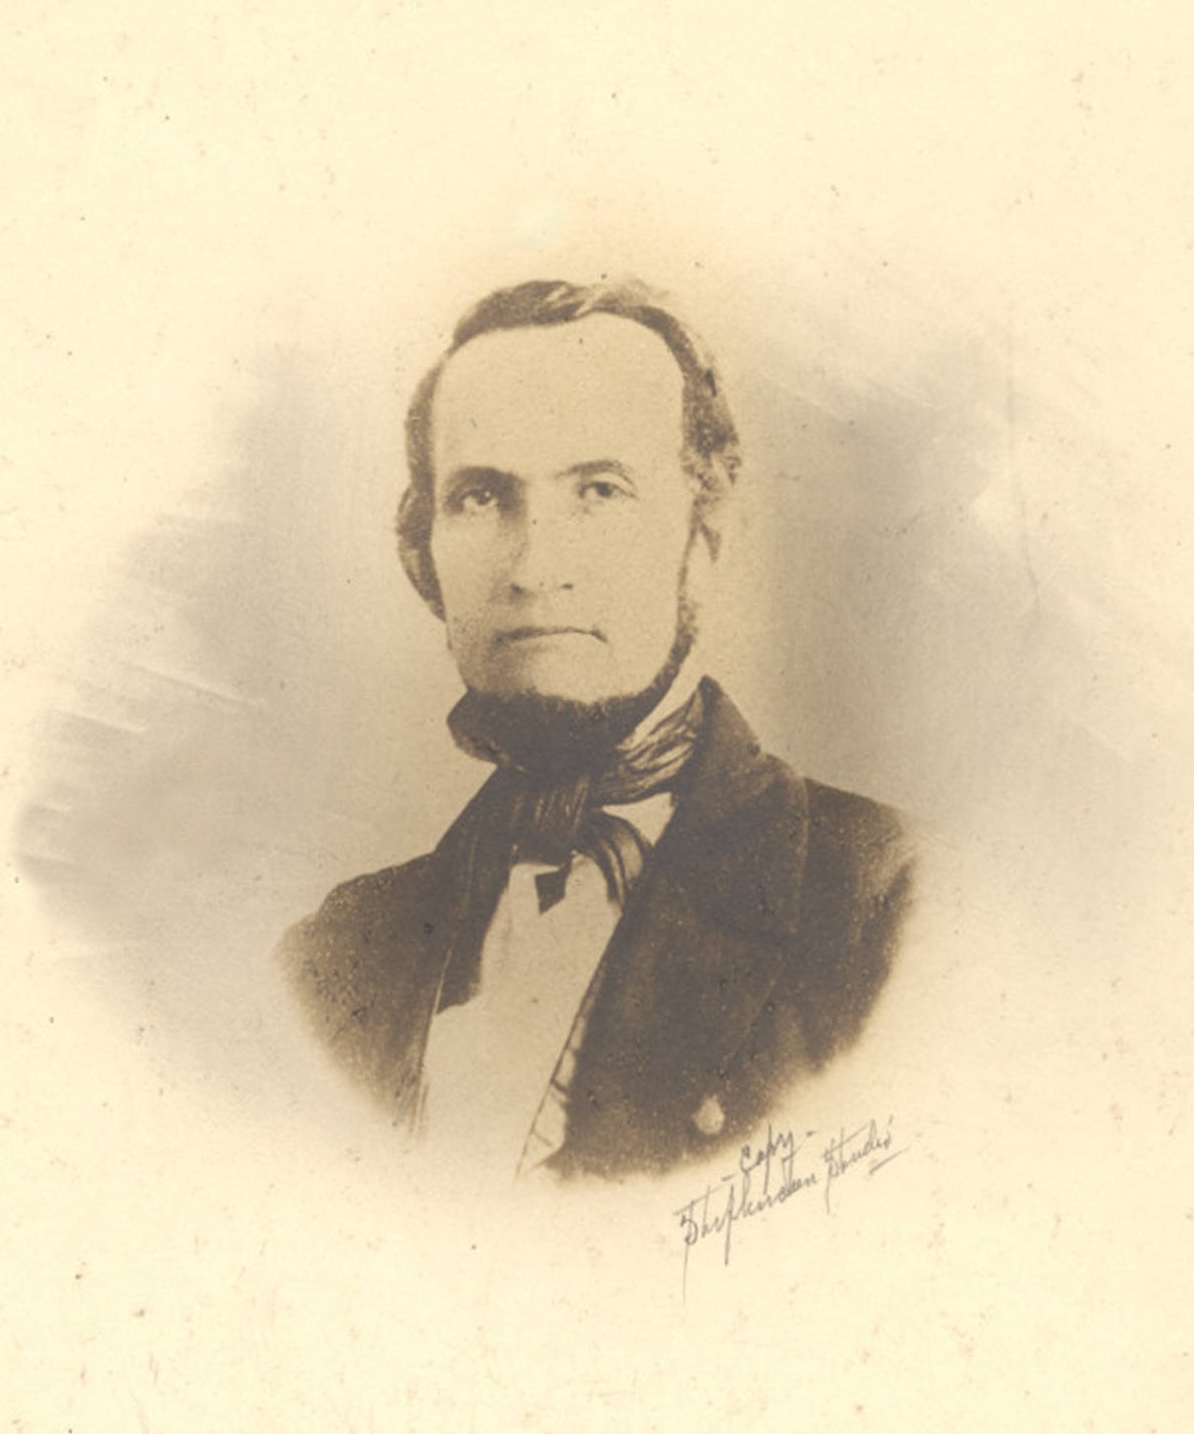 Alabama Secession Commissioner, Stephen F. Hale, to Kentucky Governor, Beriah Magoffin